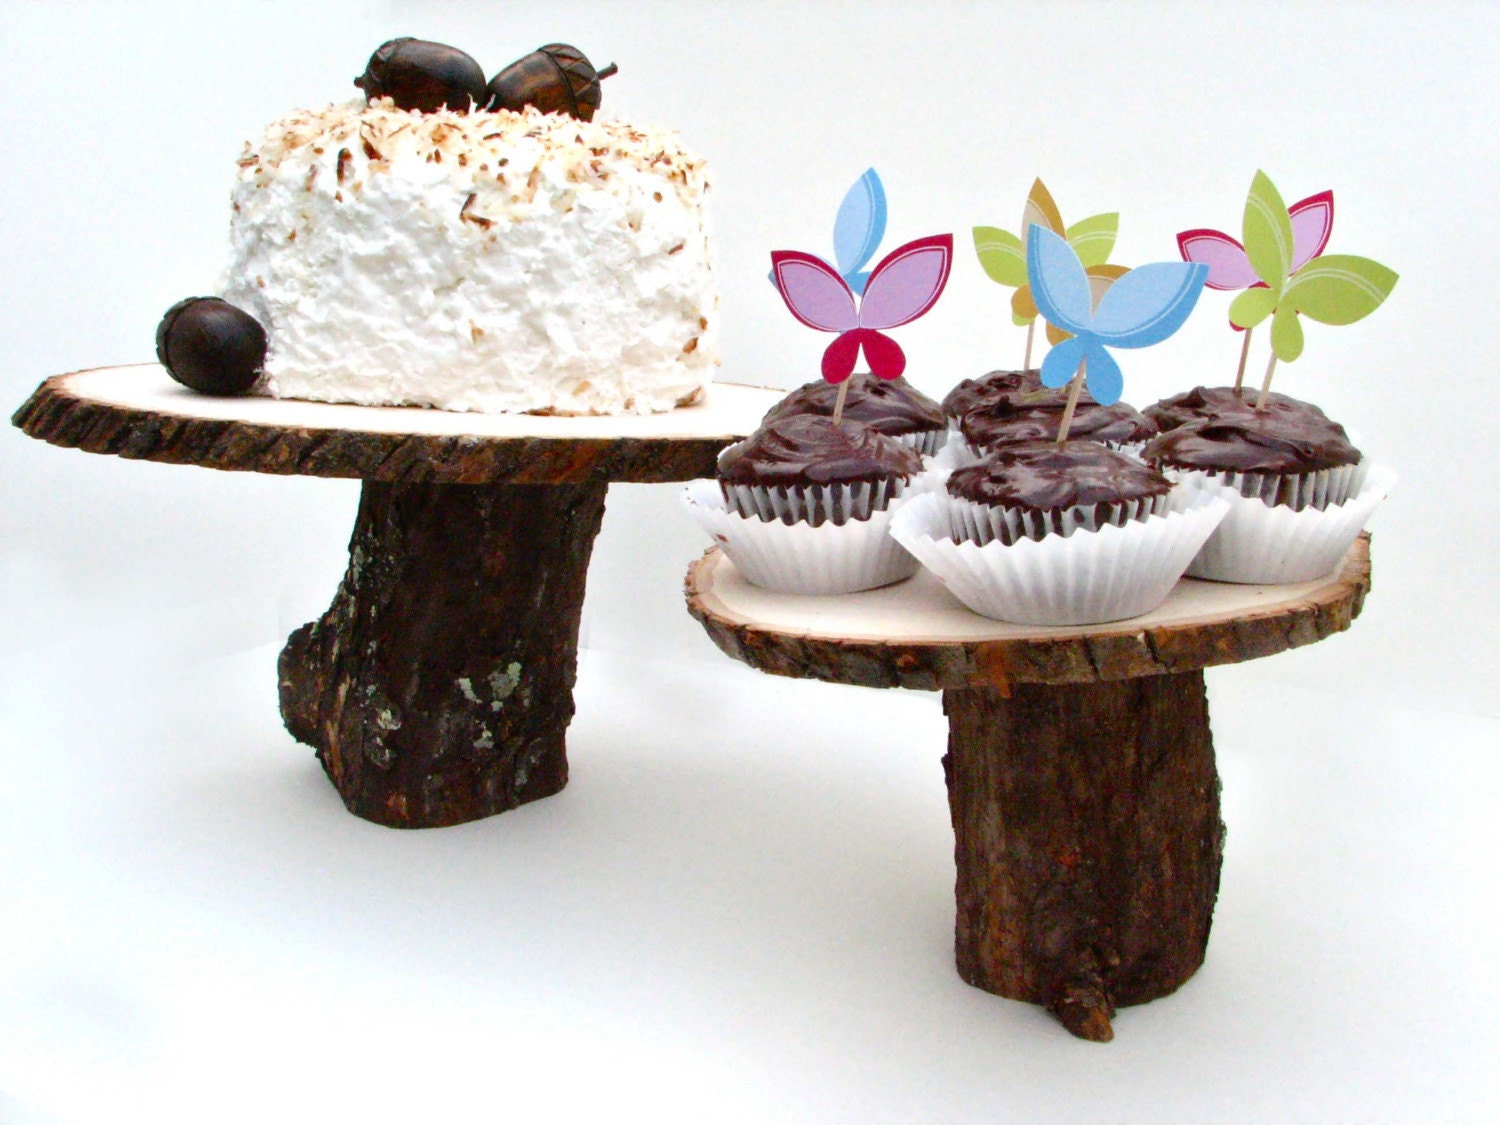 Tree stump cake stand by sixchicksdesigns on Etsy